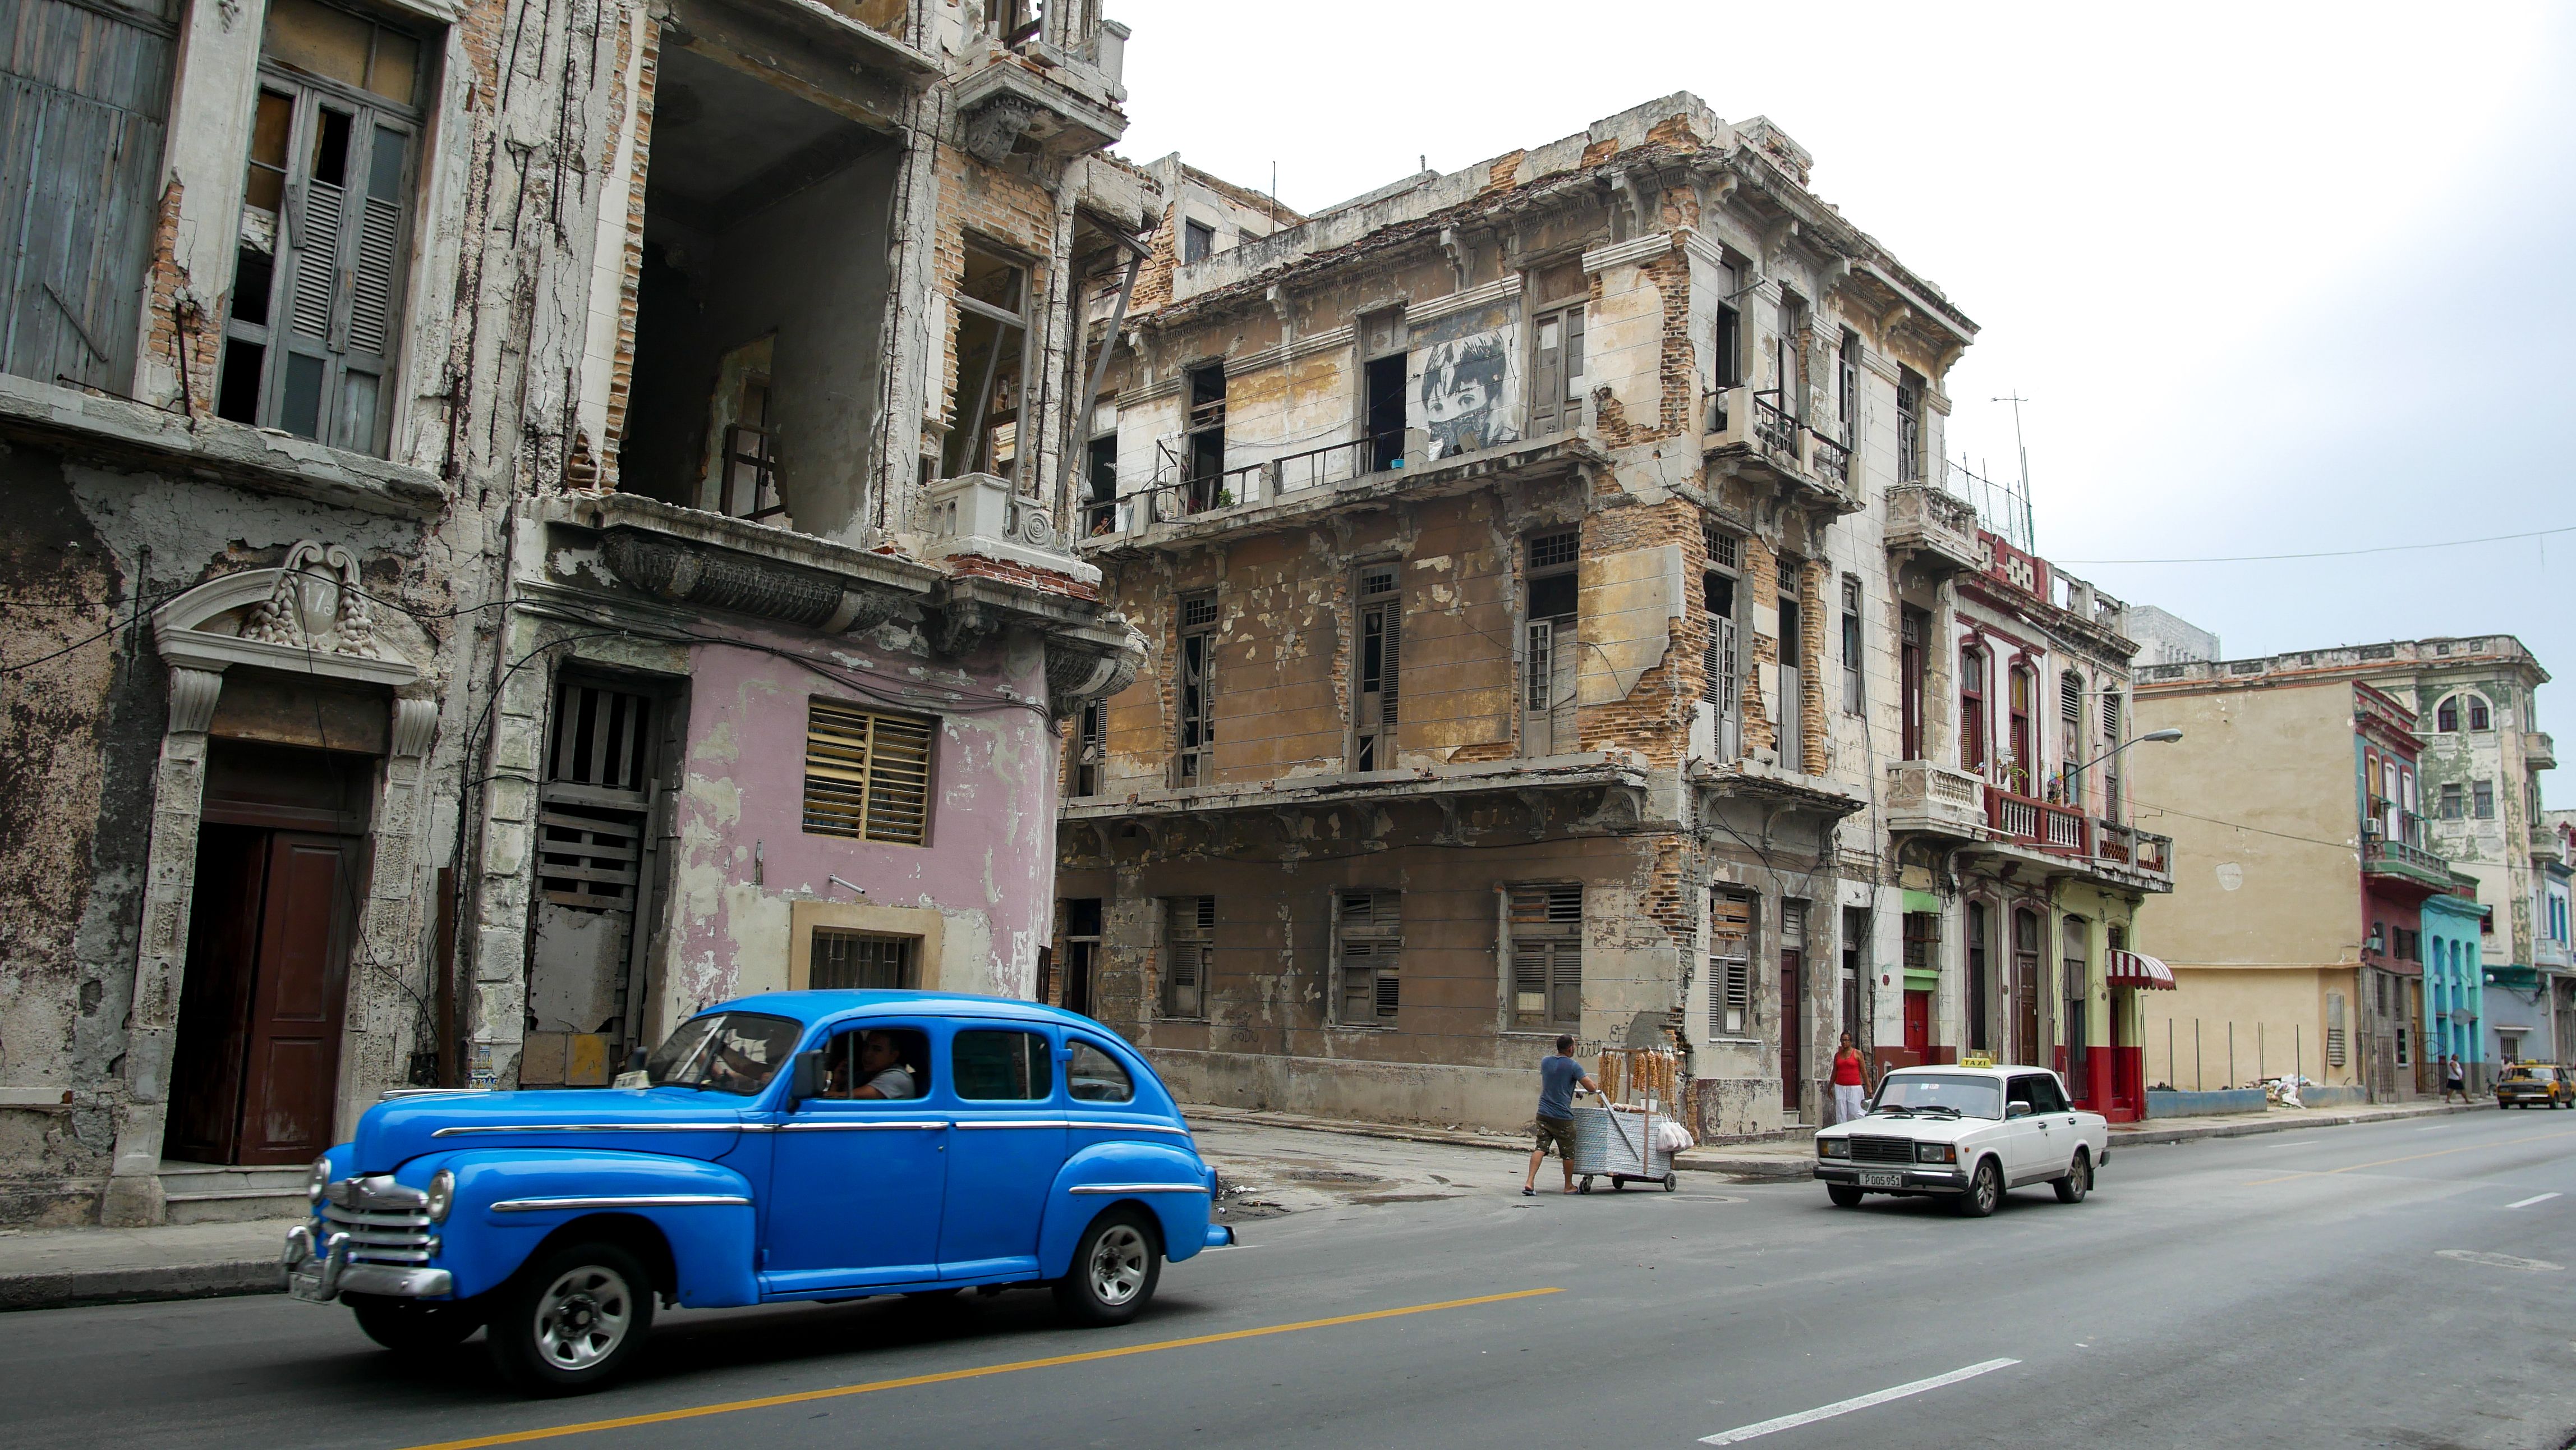 Buildings a block from Havana’s famed Malecón, a seaside walkway stretching more than four miles, show the ravages of time and weather. Image by Tracey Eaton. Cuba, 2018.